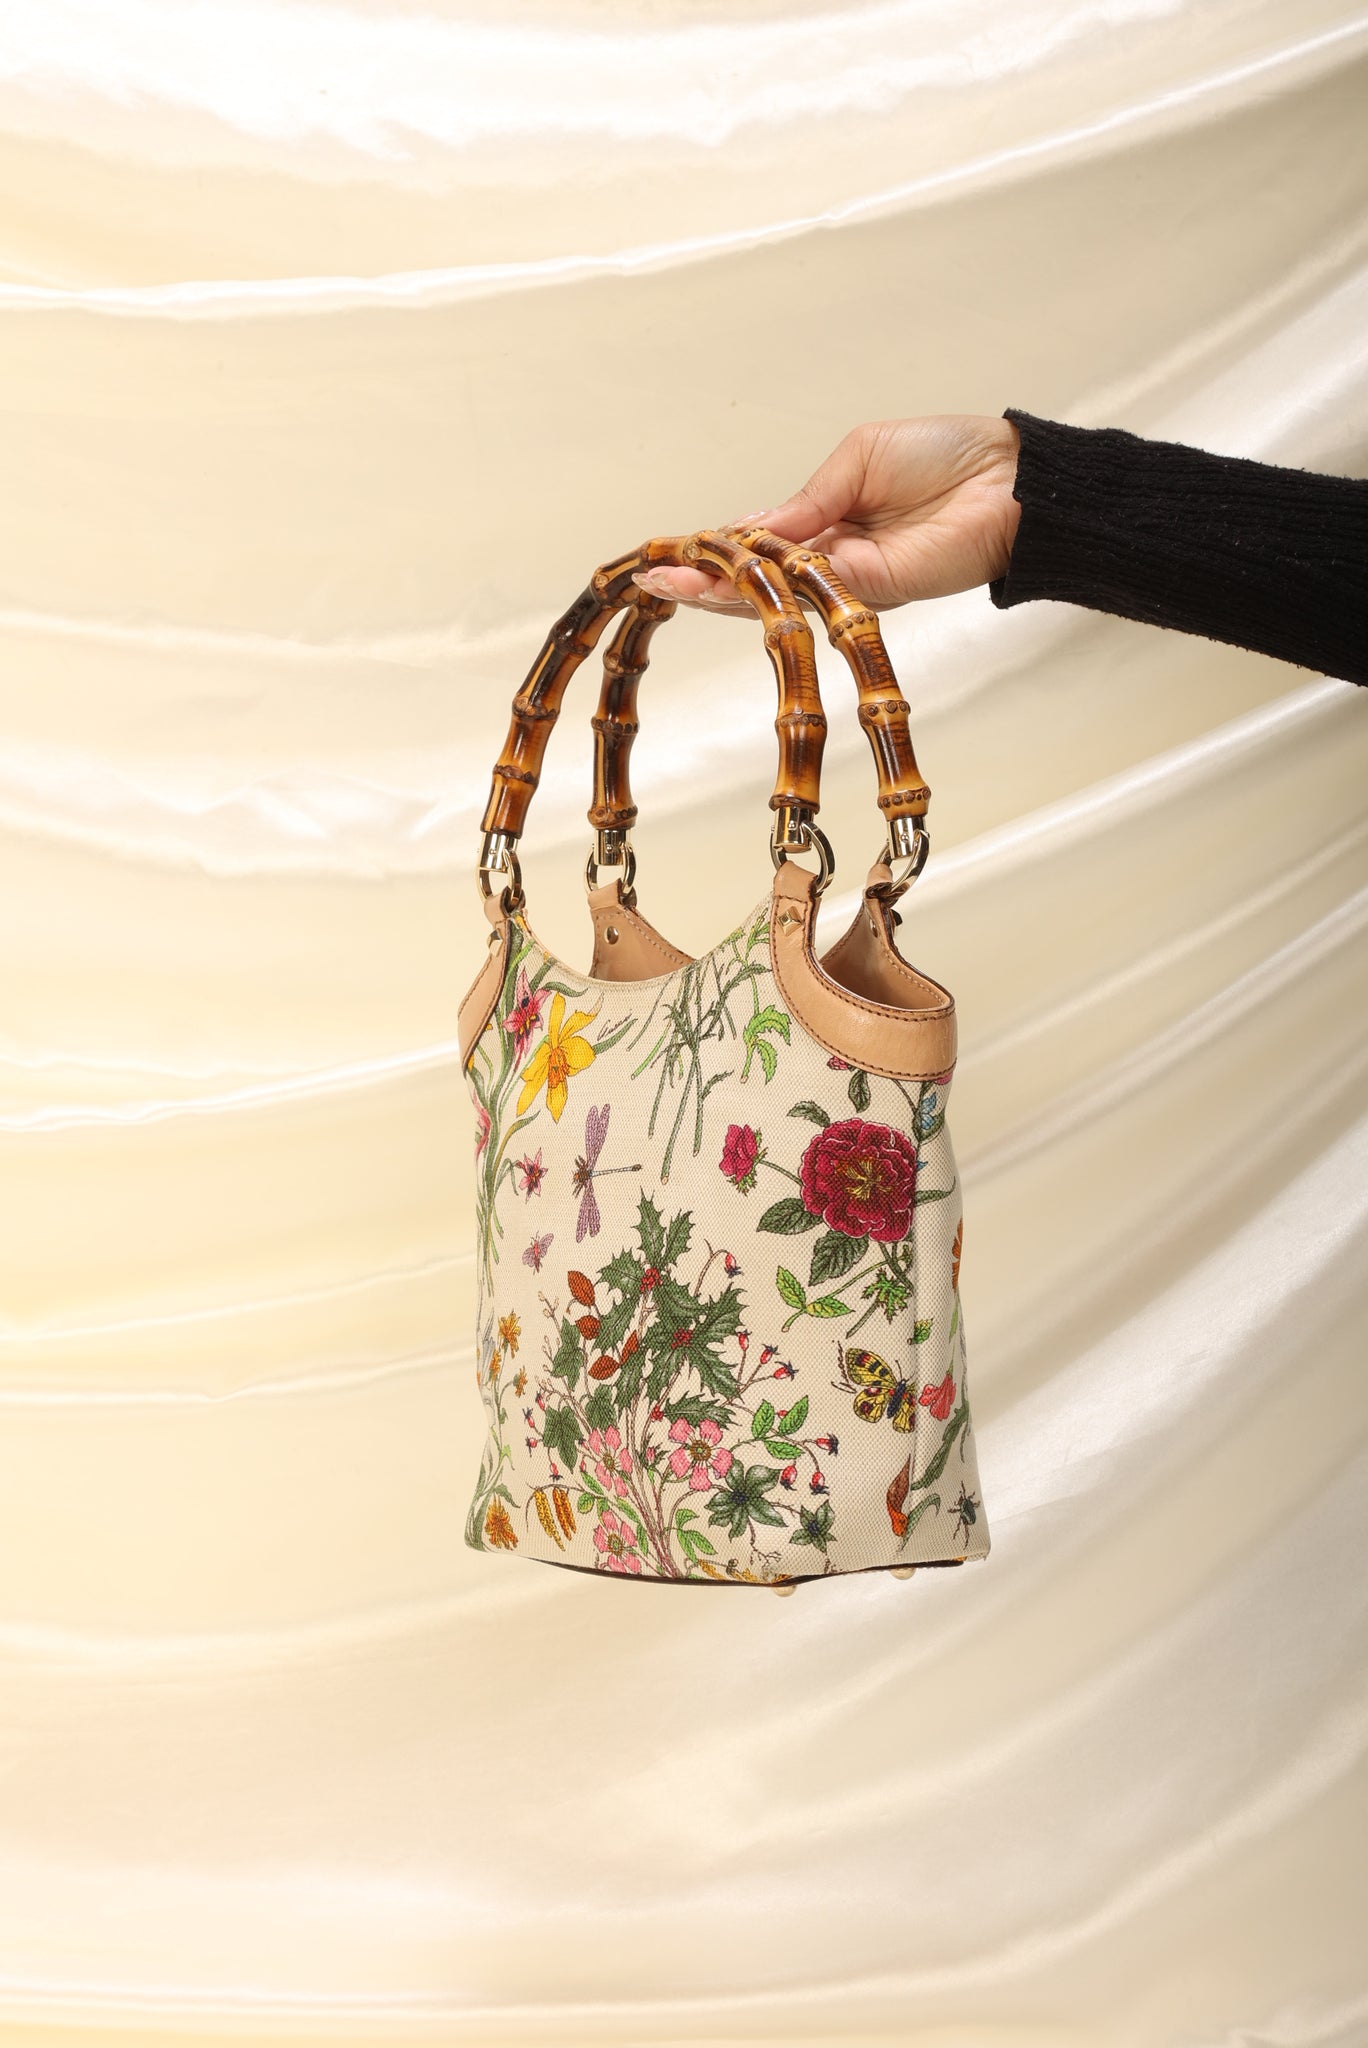 Gucci Floral Bamboo Tote